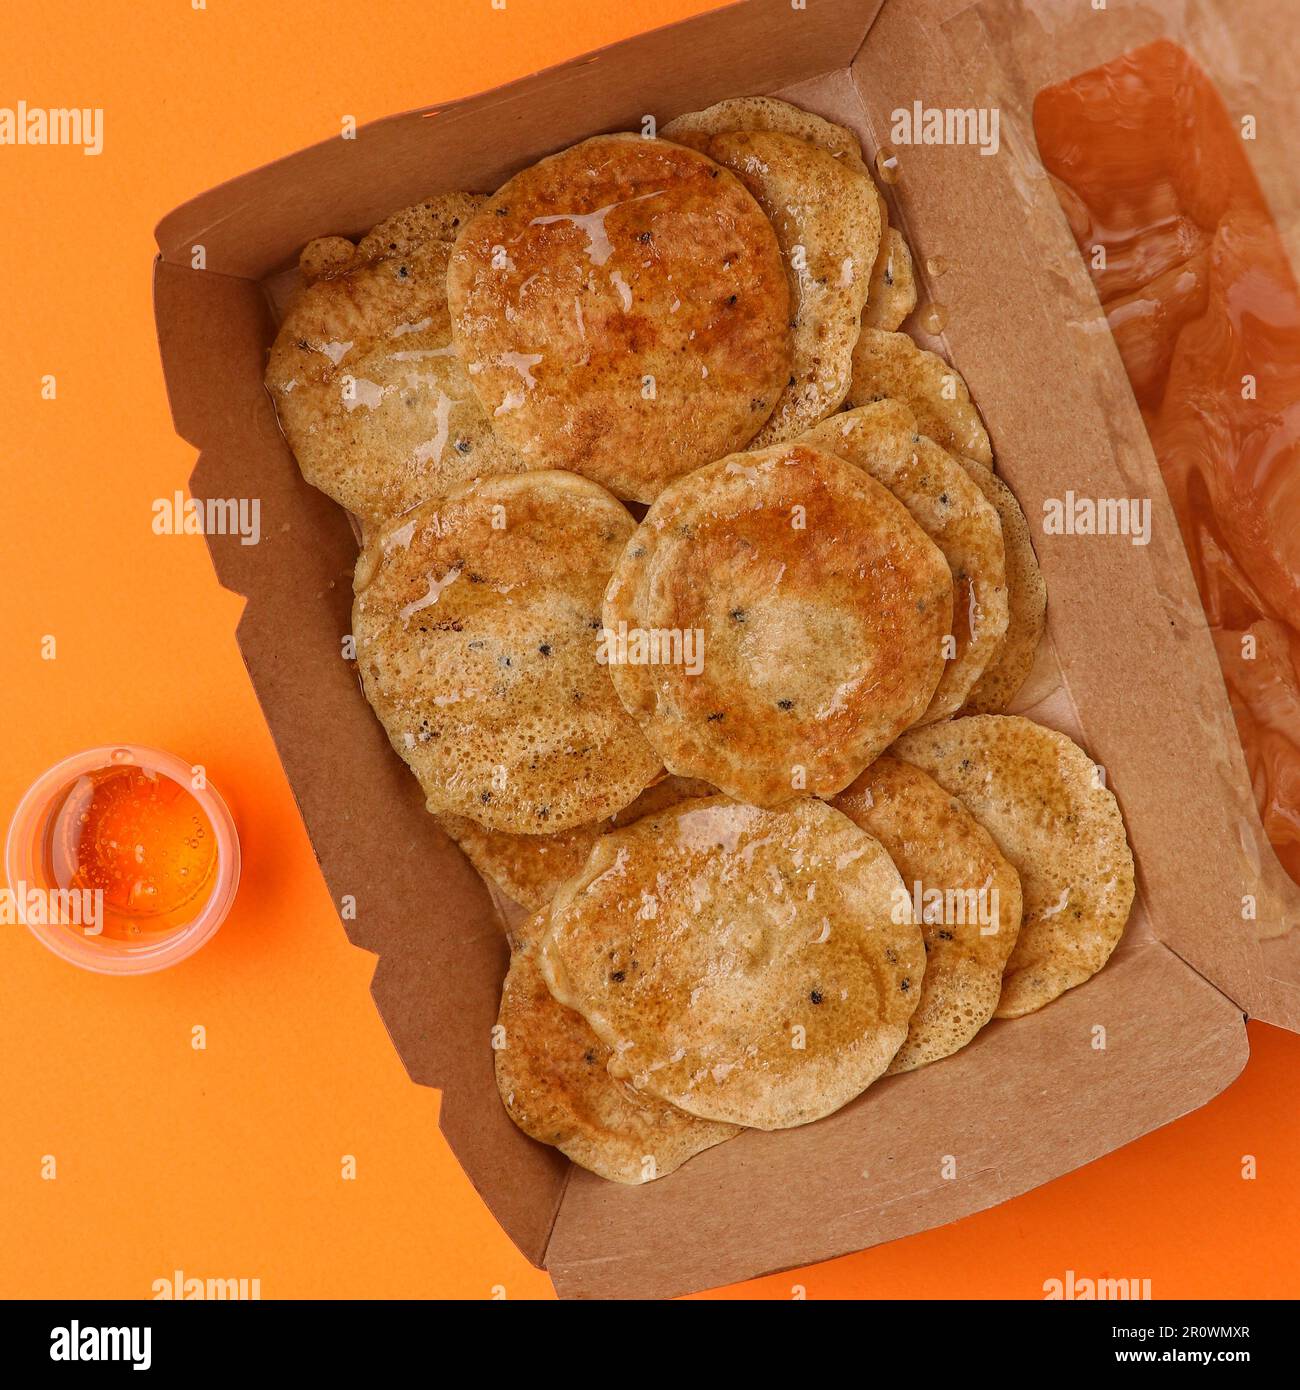 cookies with poppy seeds in a paper box on an orange background Stock Photo